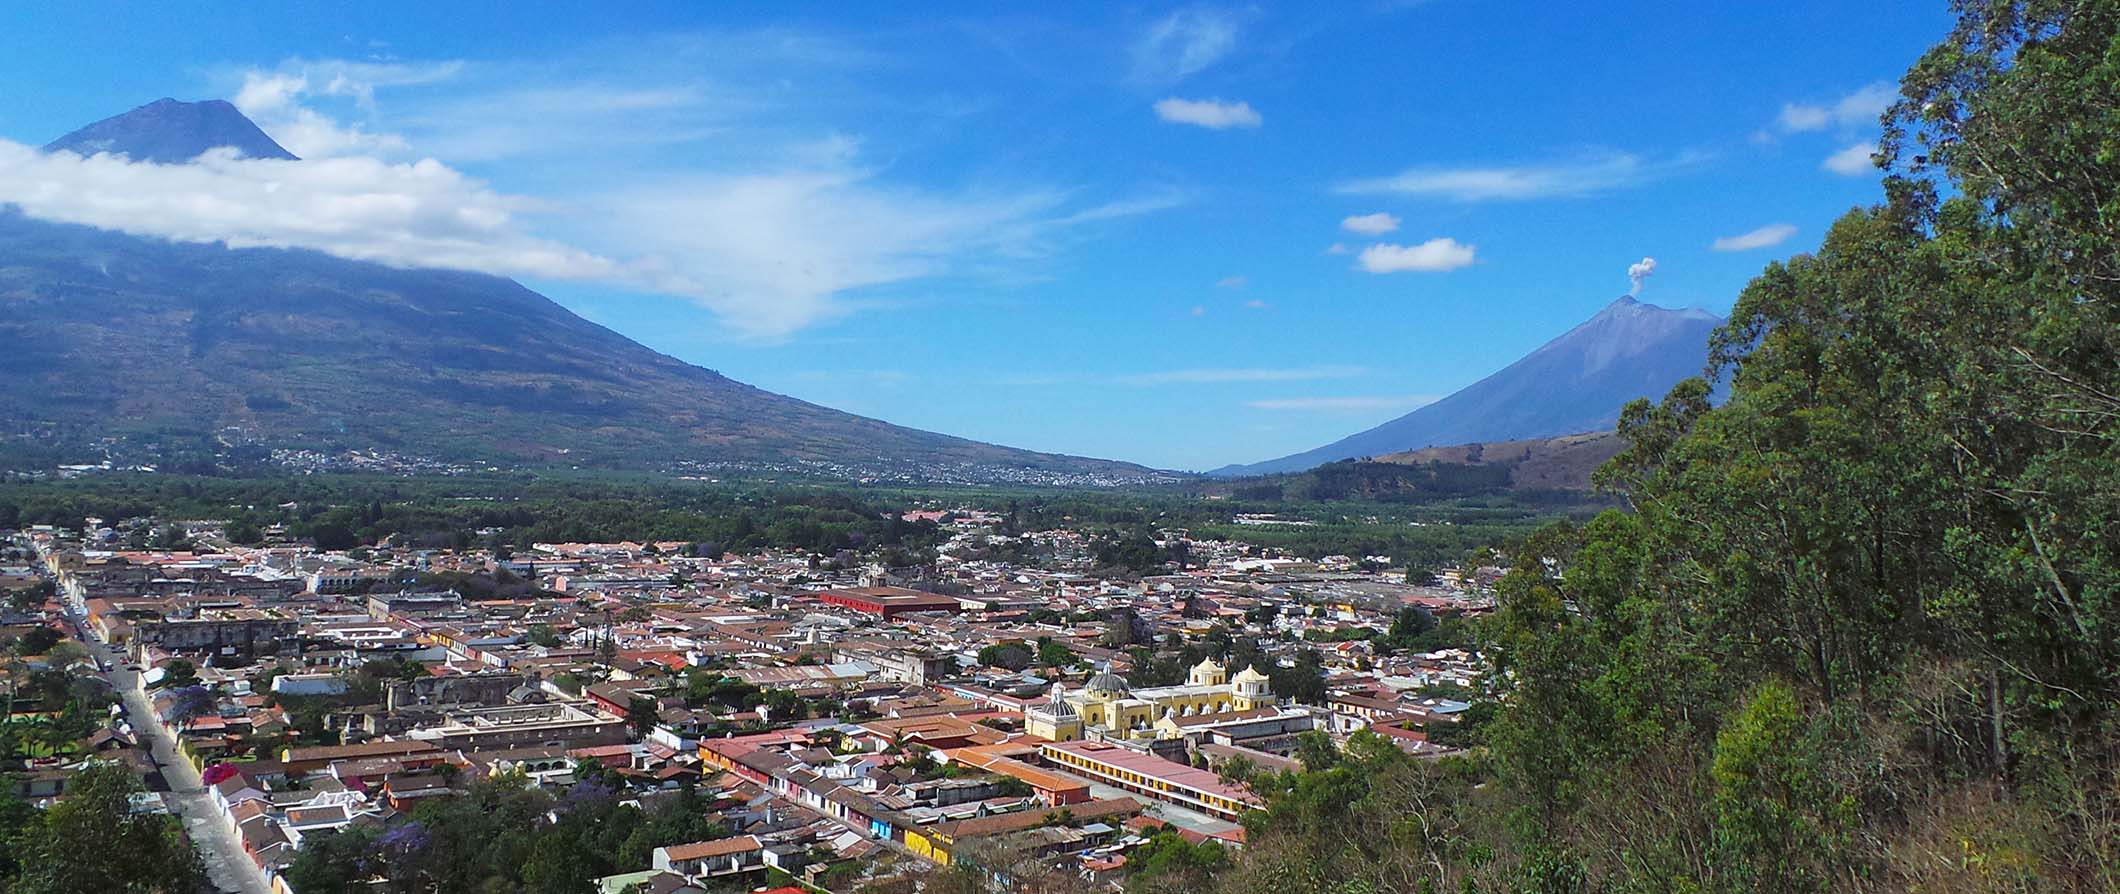 Antigua Guatemala with a view of Volcan Agua to the left and Fuego to the right